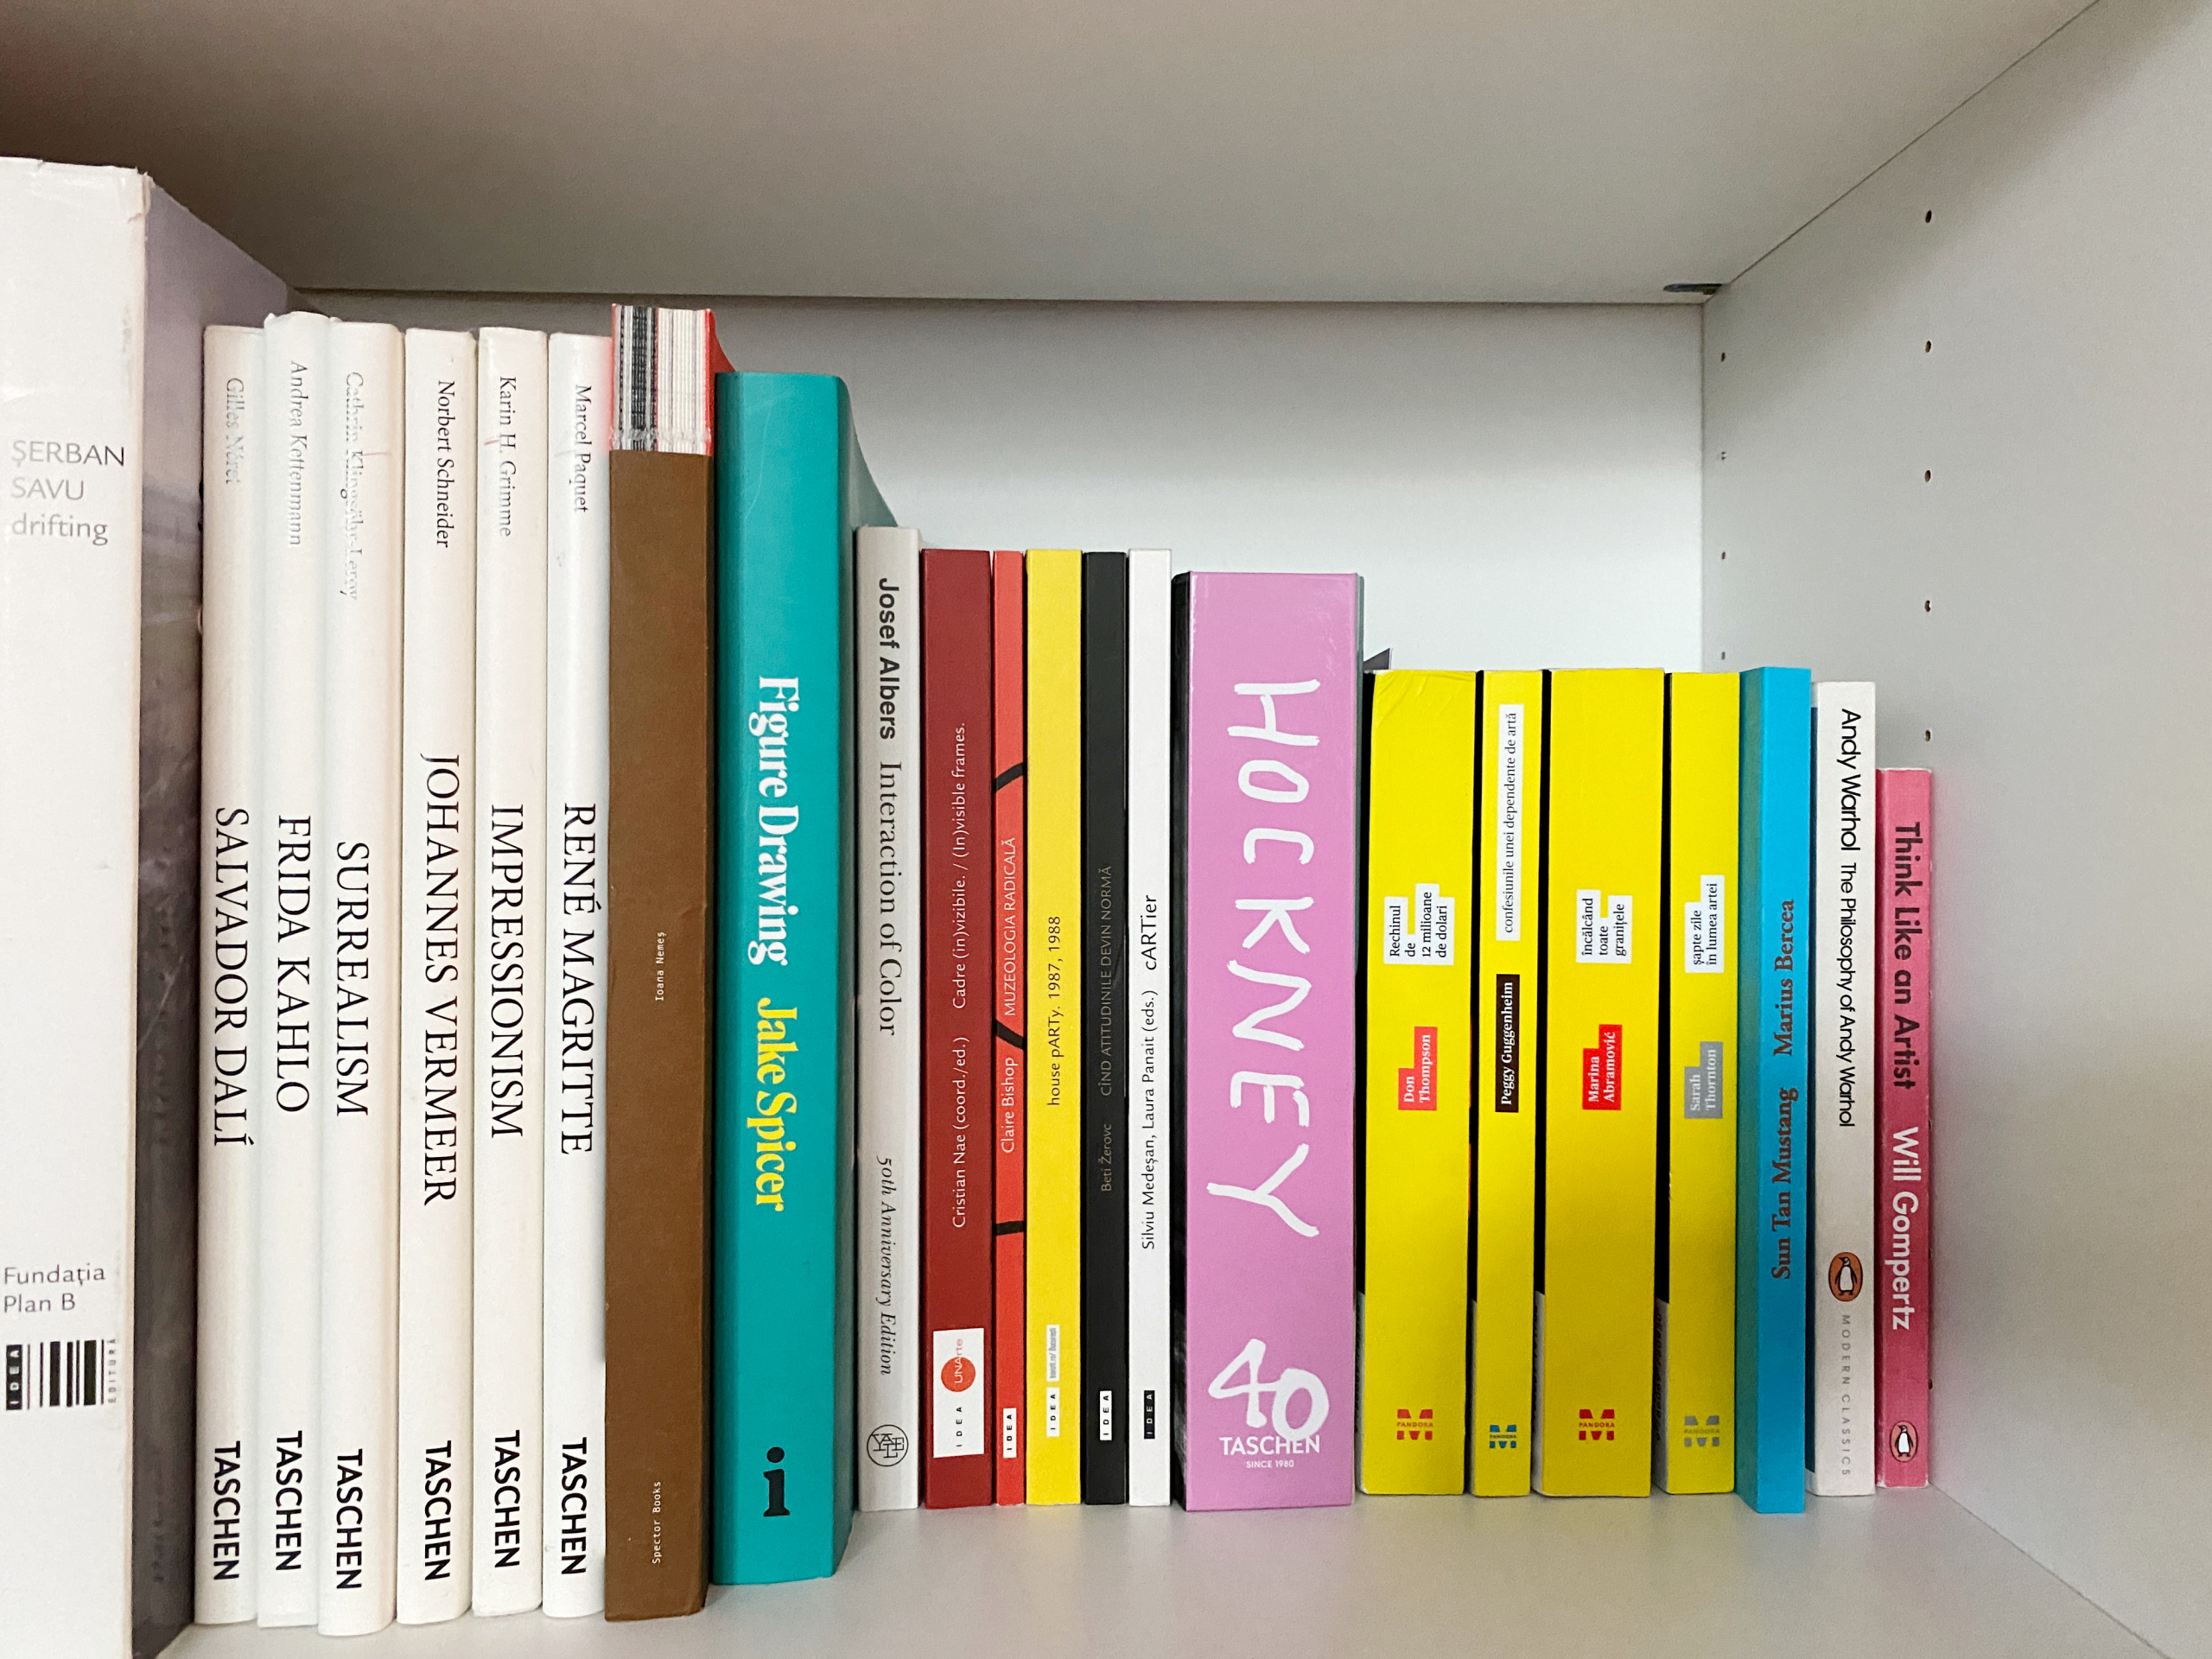 5 contemporary art books you must read - ContemporaryAF